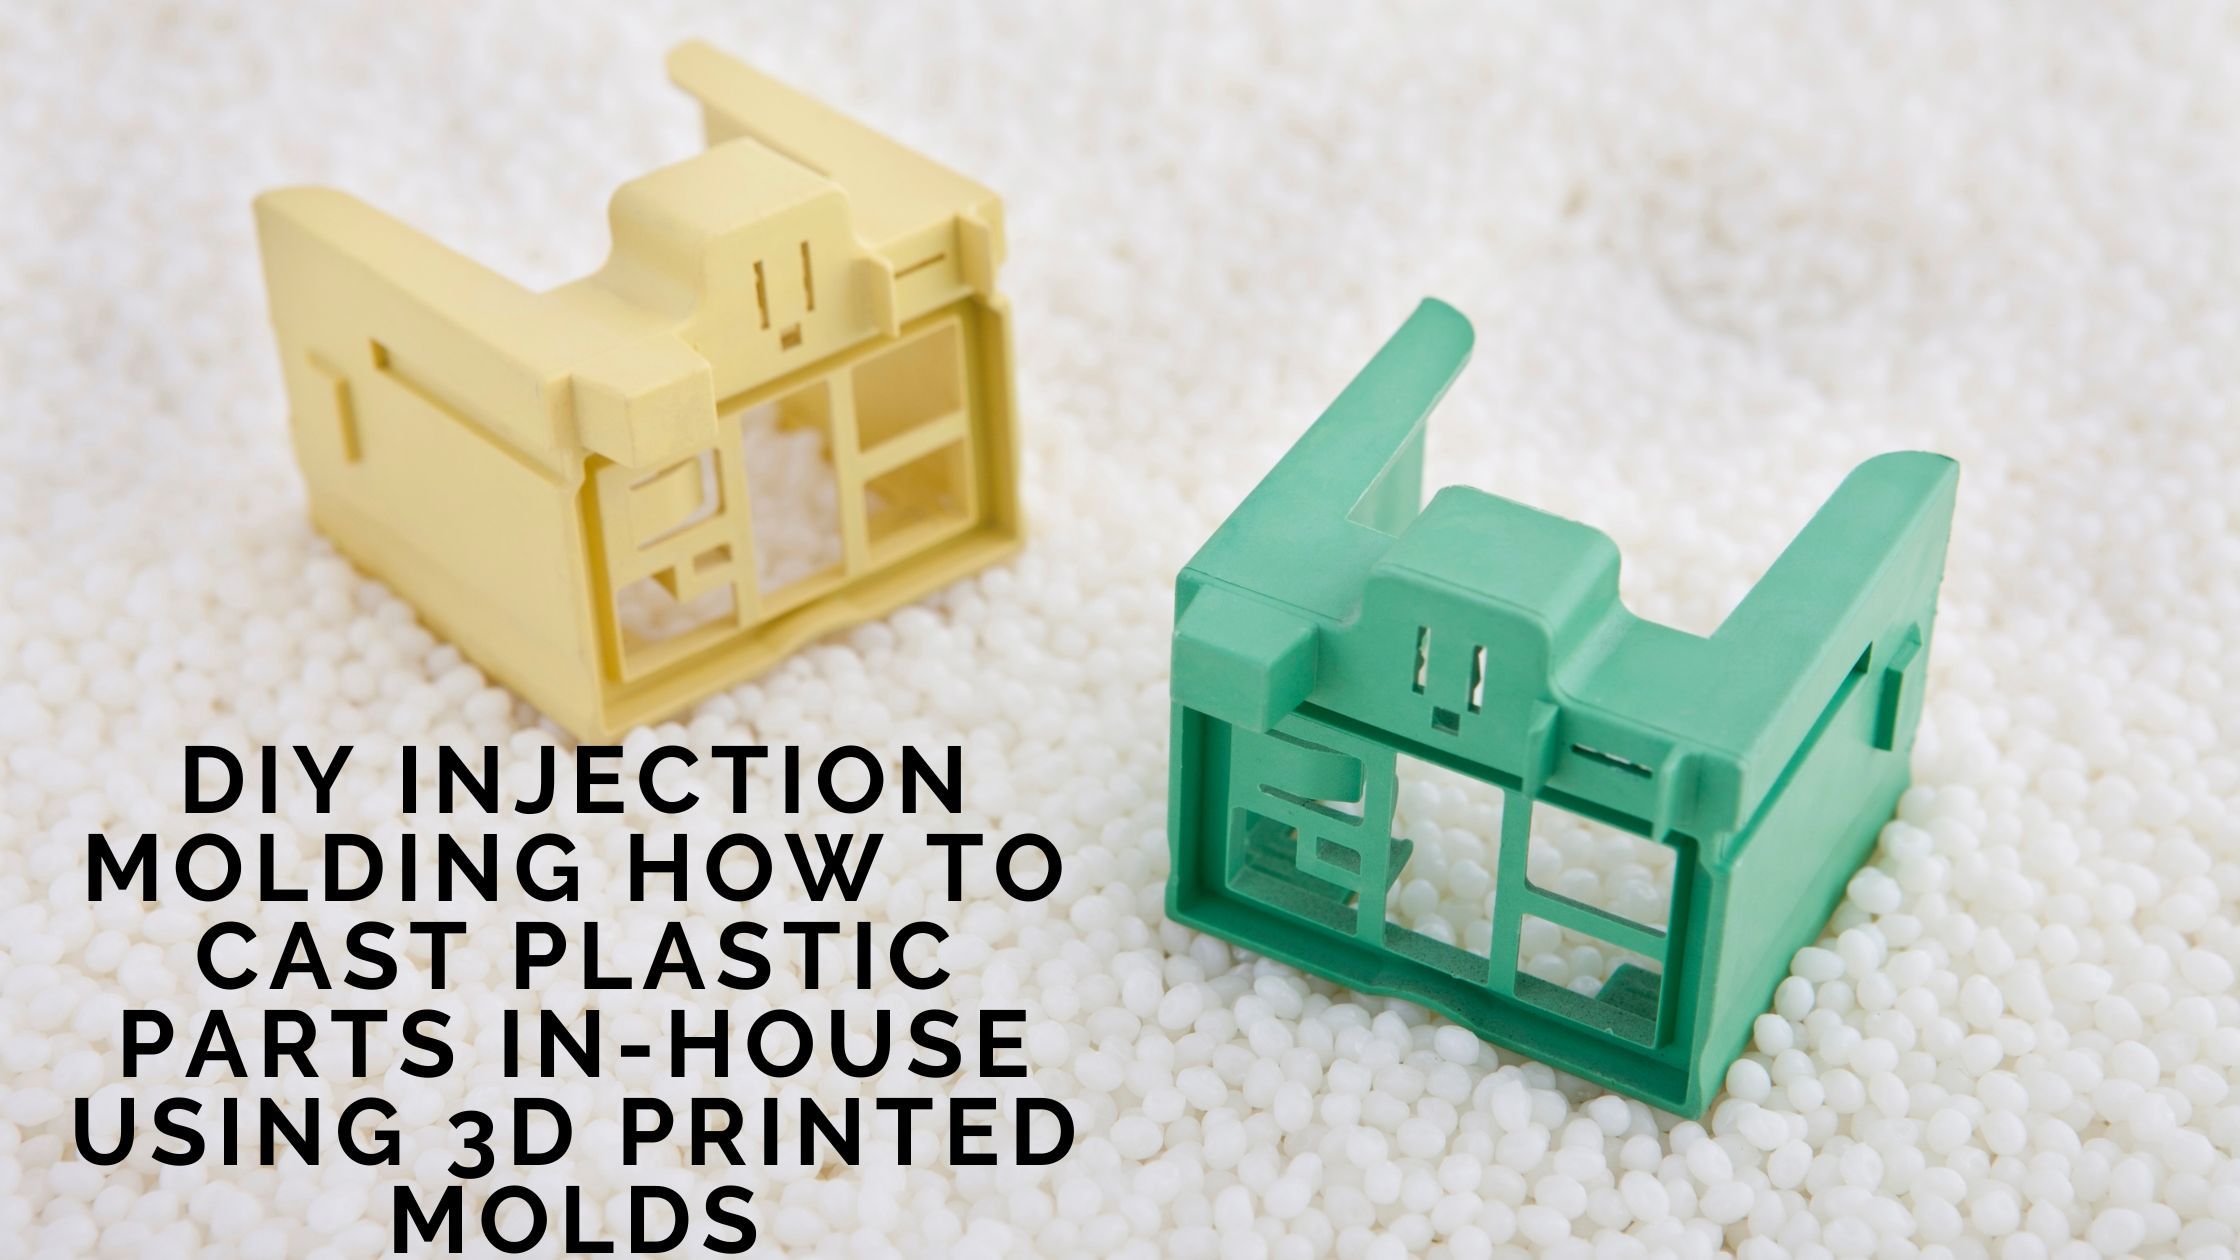 DIY Injection Molding How to Cast Plastic Parts in-House Using 3D Printed Molds